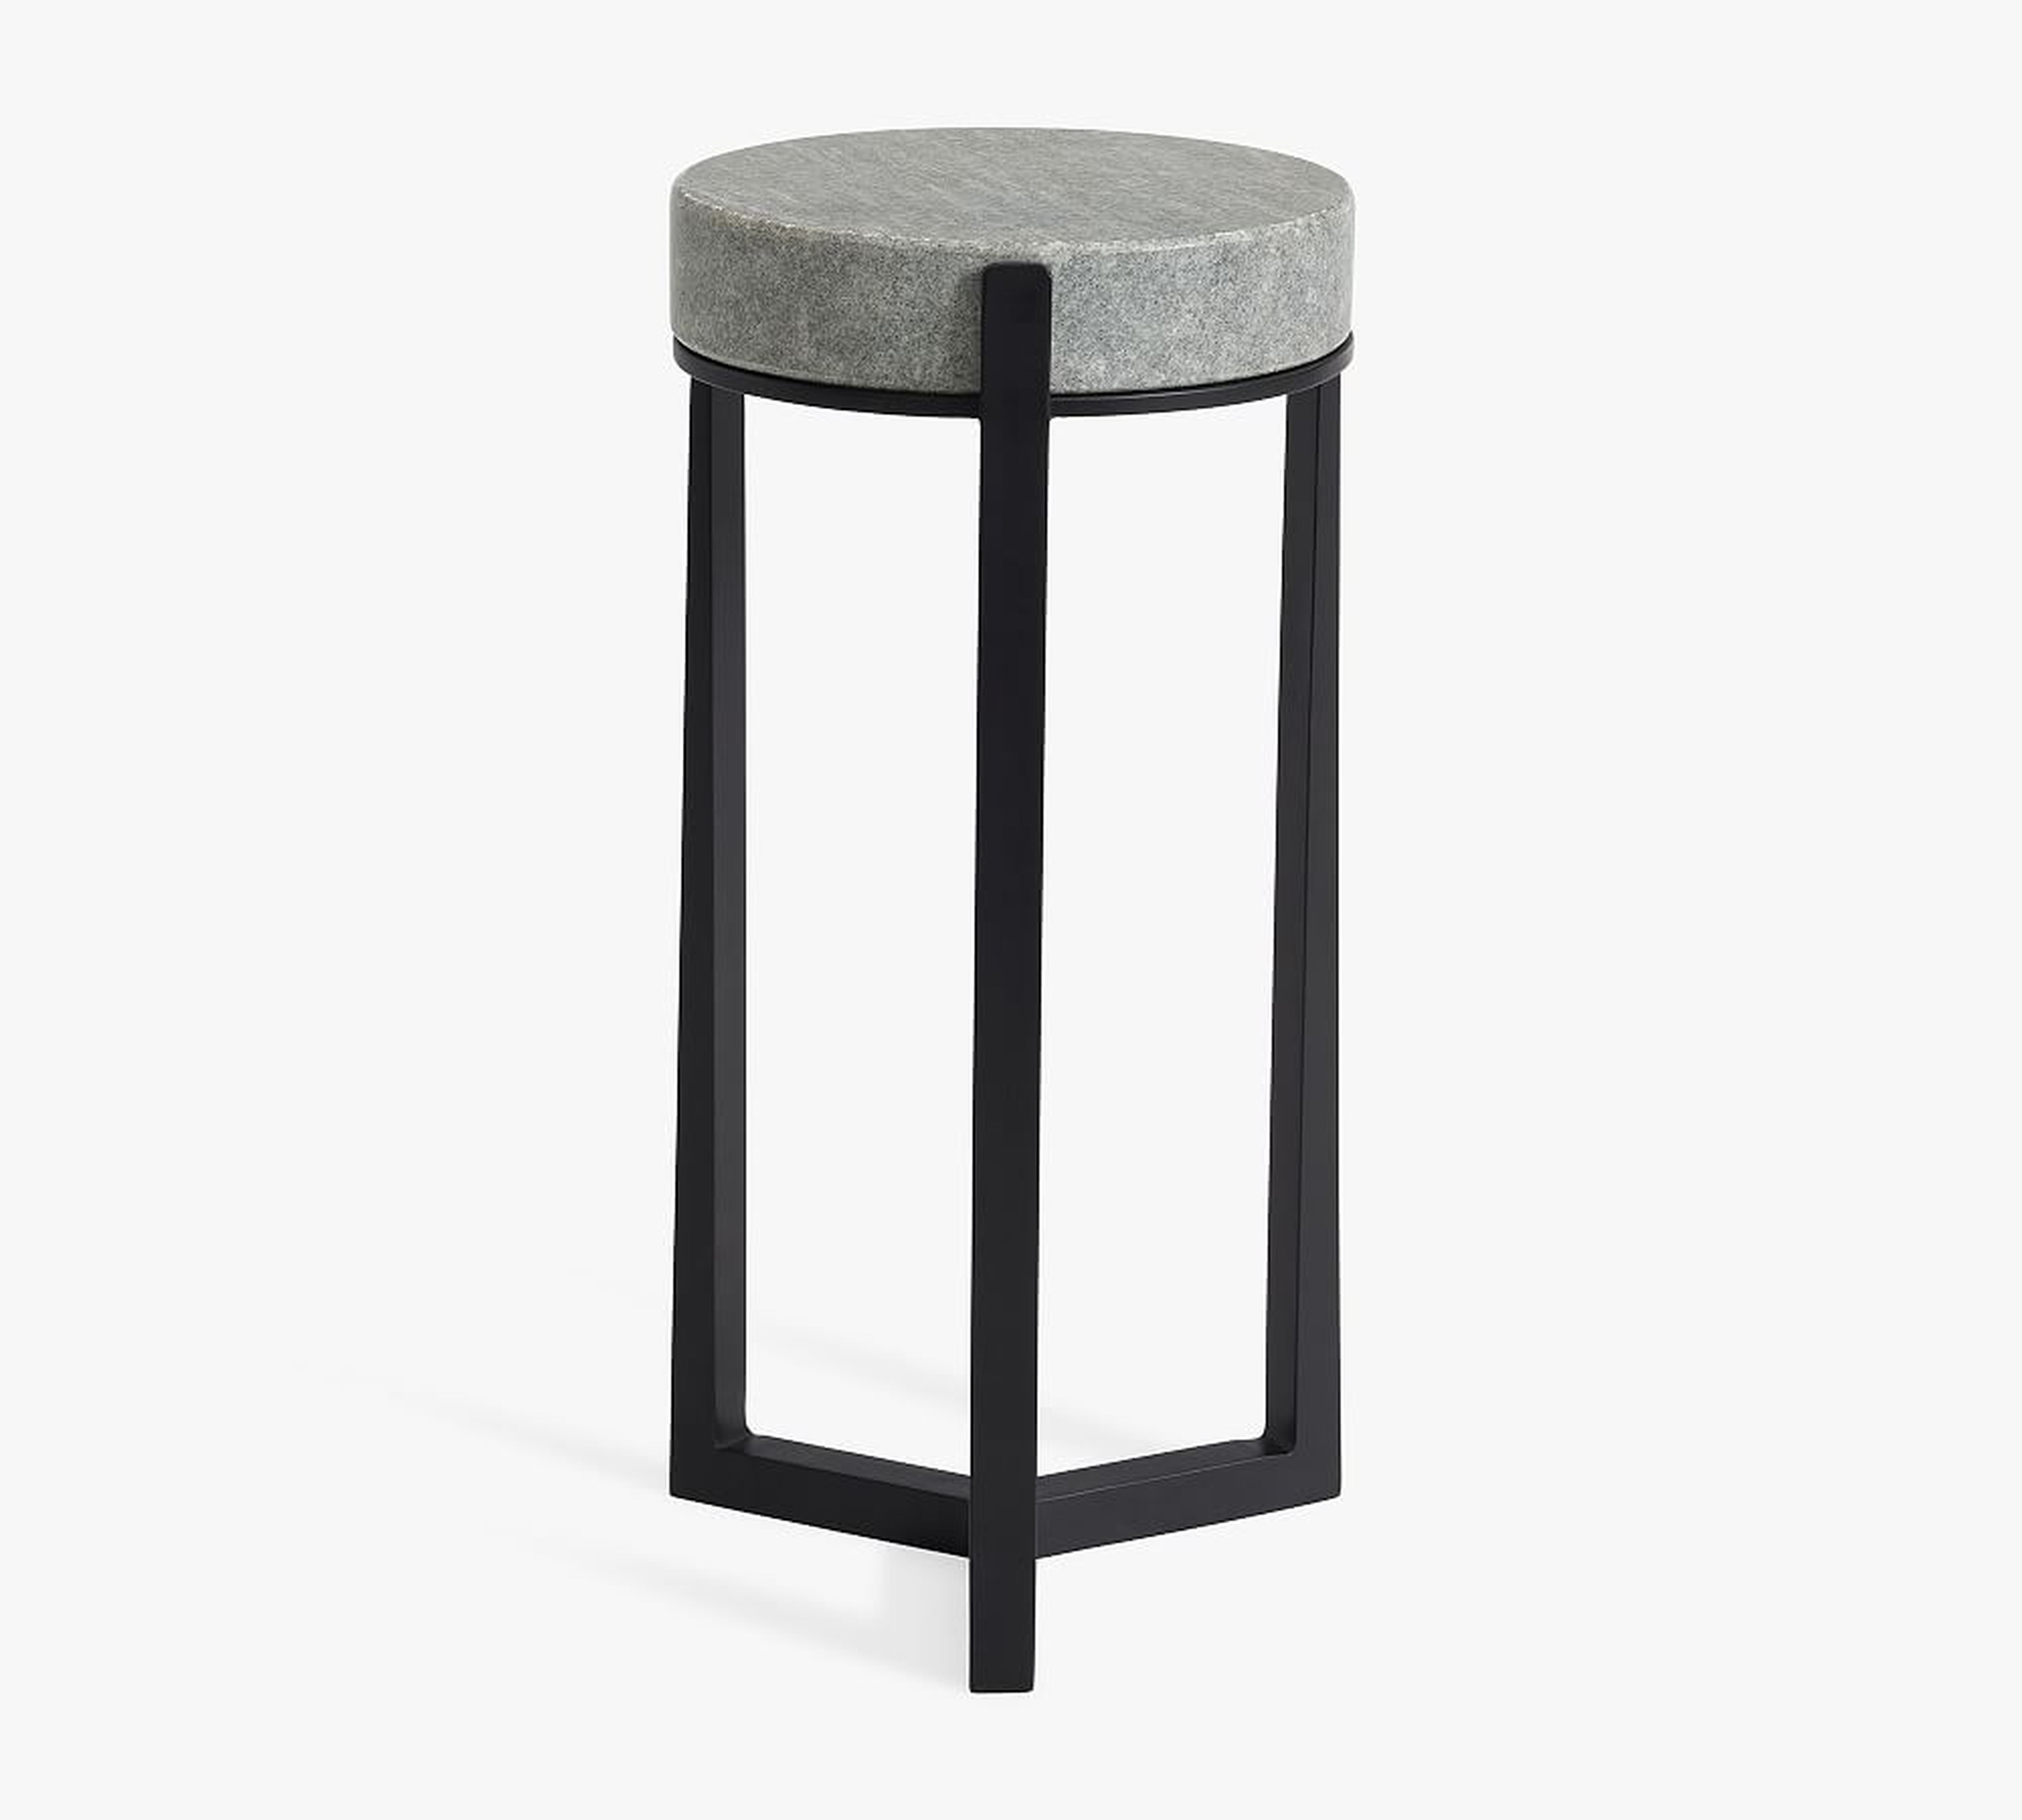 Cori 10" Round Marble Accent Table, Gray Marble Top/Bronze Base - Pottery Barn